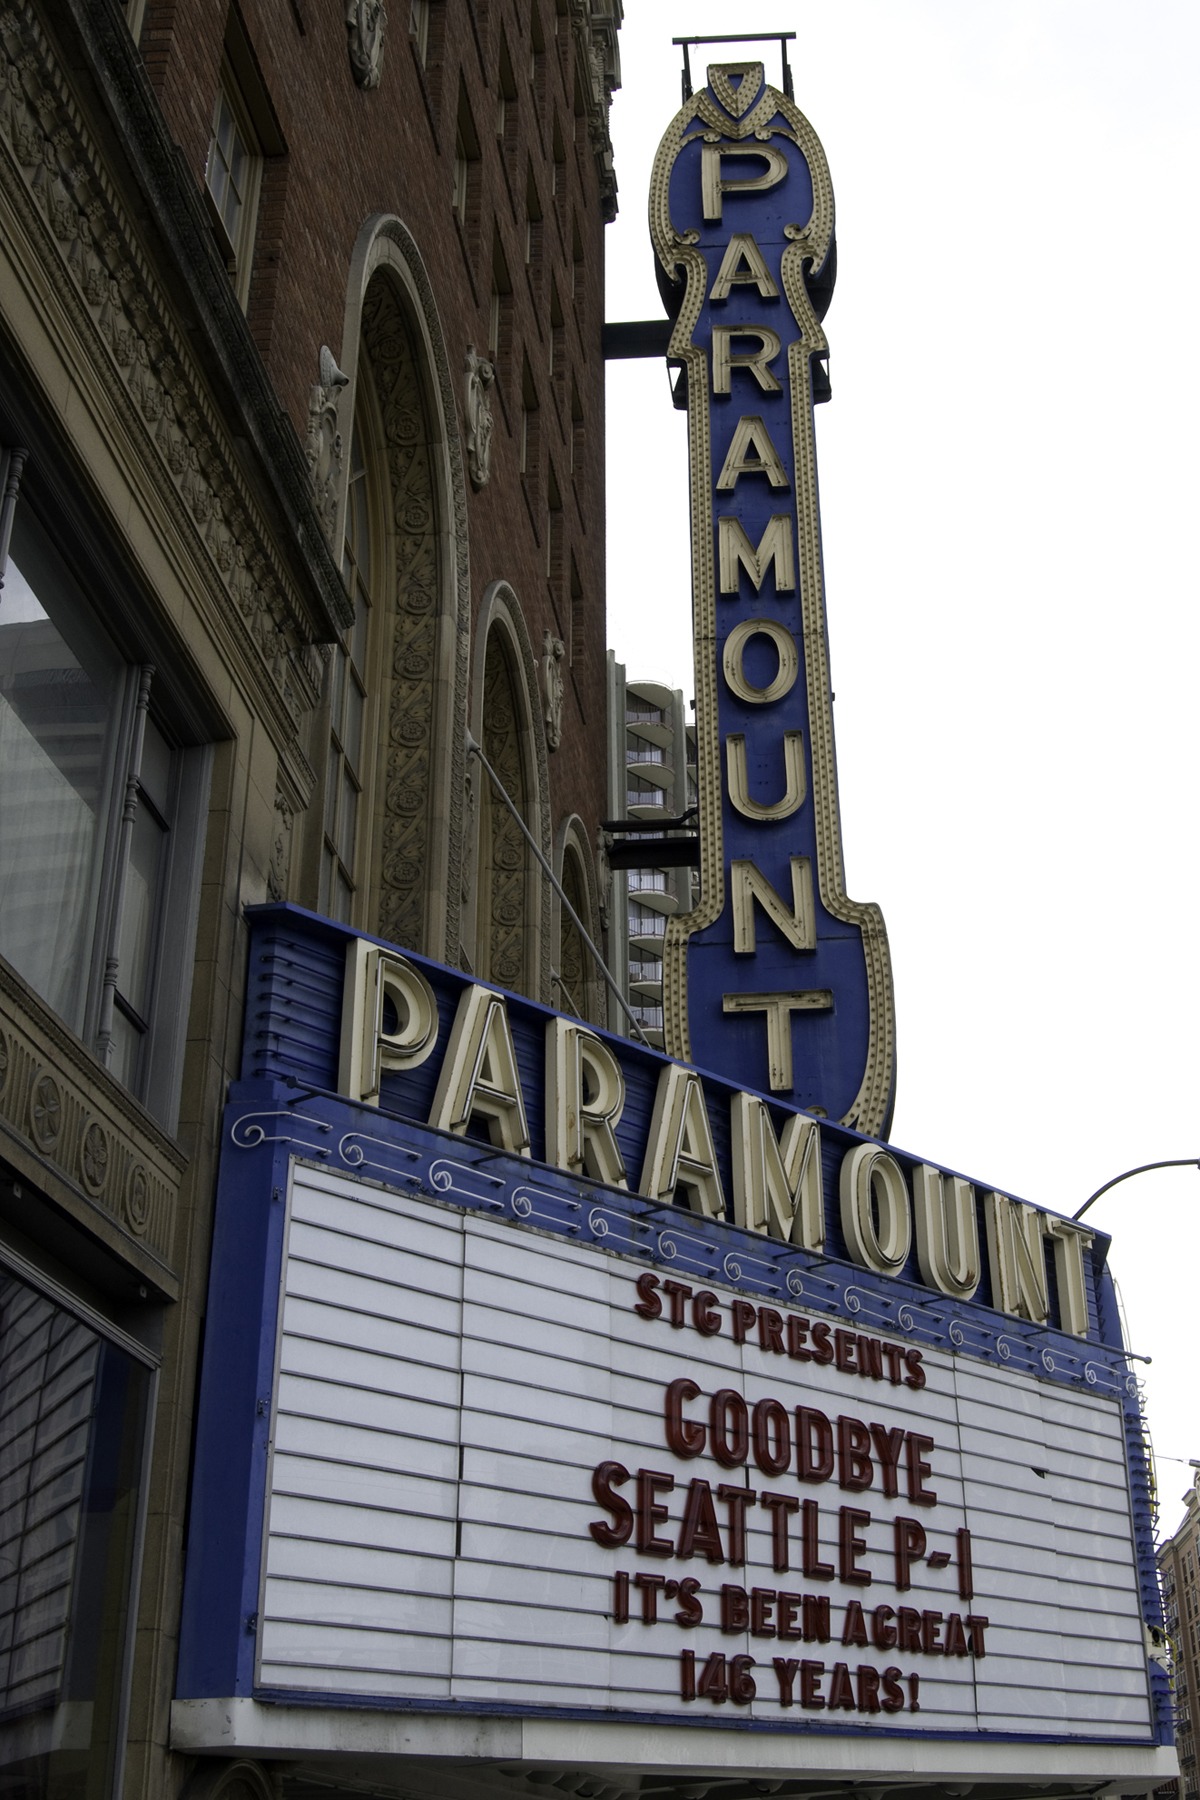 Stg Paramount Theater Seating Chart